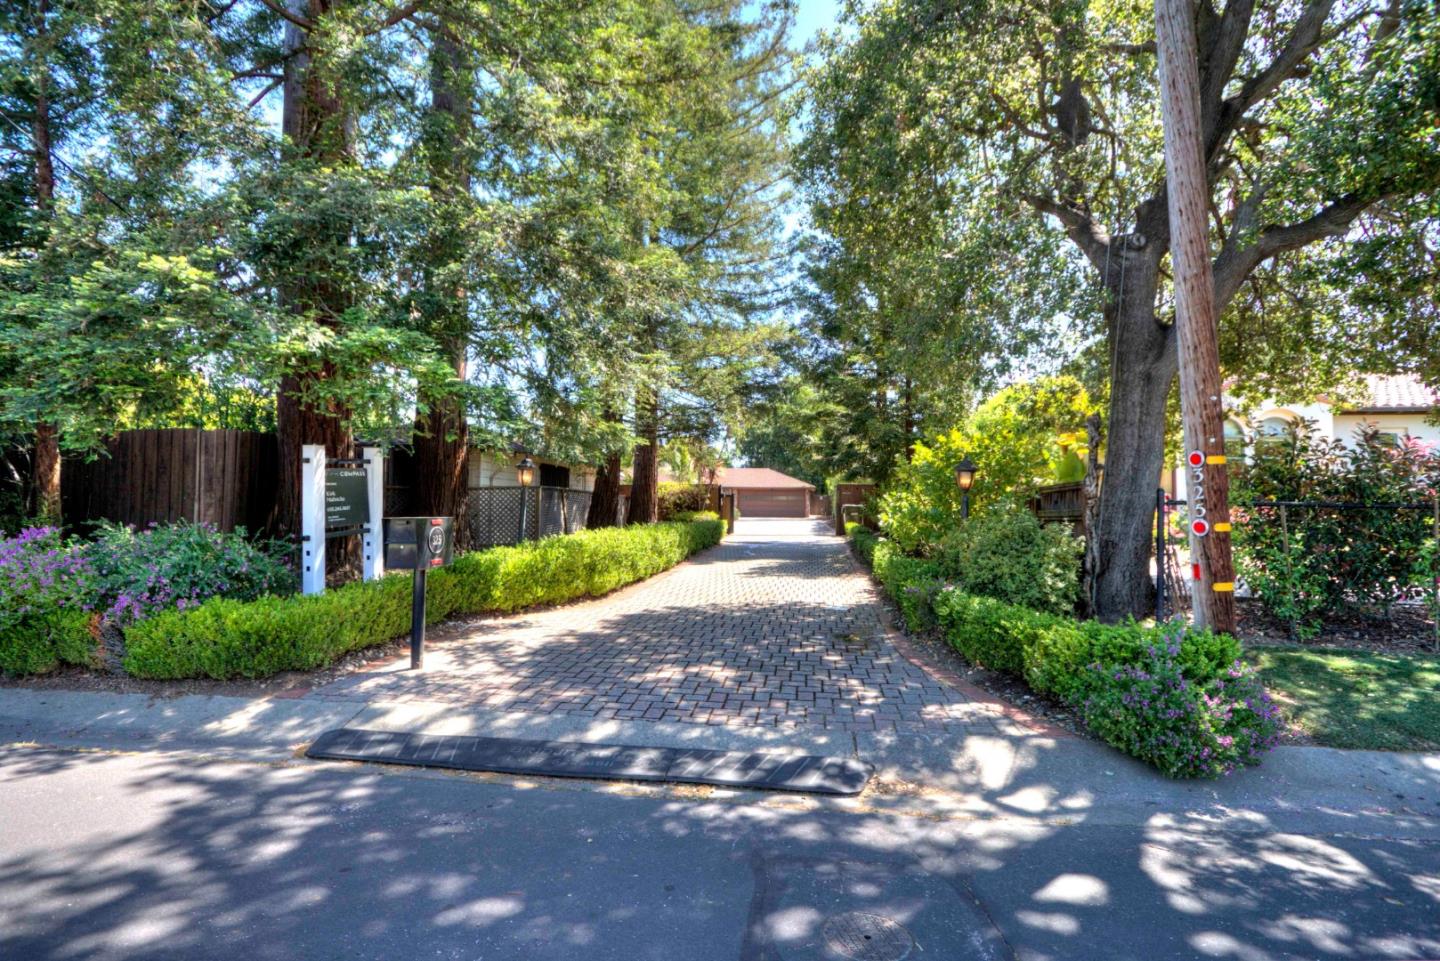 Discover the long redwood flanked paver driveway secluded in the luxuriant streetscape screening this estate-sized parcel near the Village. Beyond the mature redwoods the security gate rolls open to reveal a motorcourt with a sprawling 1970s style ranch home flanked by four garages, a workshop, and ADU. The main house of approximately 3345 SF includes 3 bedrooms, 3.5 baths, 3 HVAC zones, formal dining room, vaulted ceiling living room, quality appliances, steam shower, 3 fireplaces, wet bar, and theater room. The yard features a large pool, separate spa, lush mature landscaping, koi pond, waterfall, and extensive flagstone patios, ideal for large-scale entertaining in a very private setting. Convenient to top-rated Los Altos Schools. Buyer to rely on their own investigation of how new options SB9 may benefit this property.